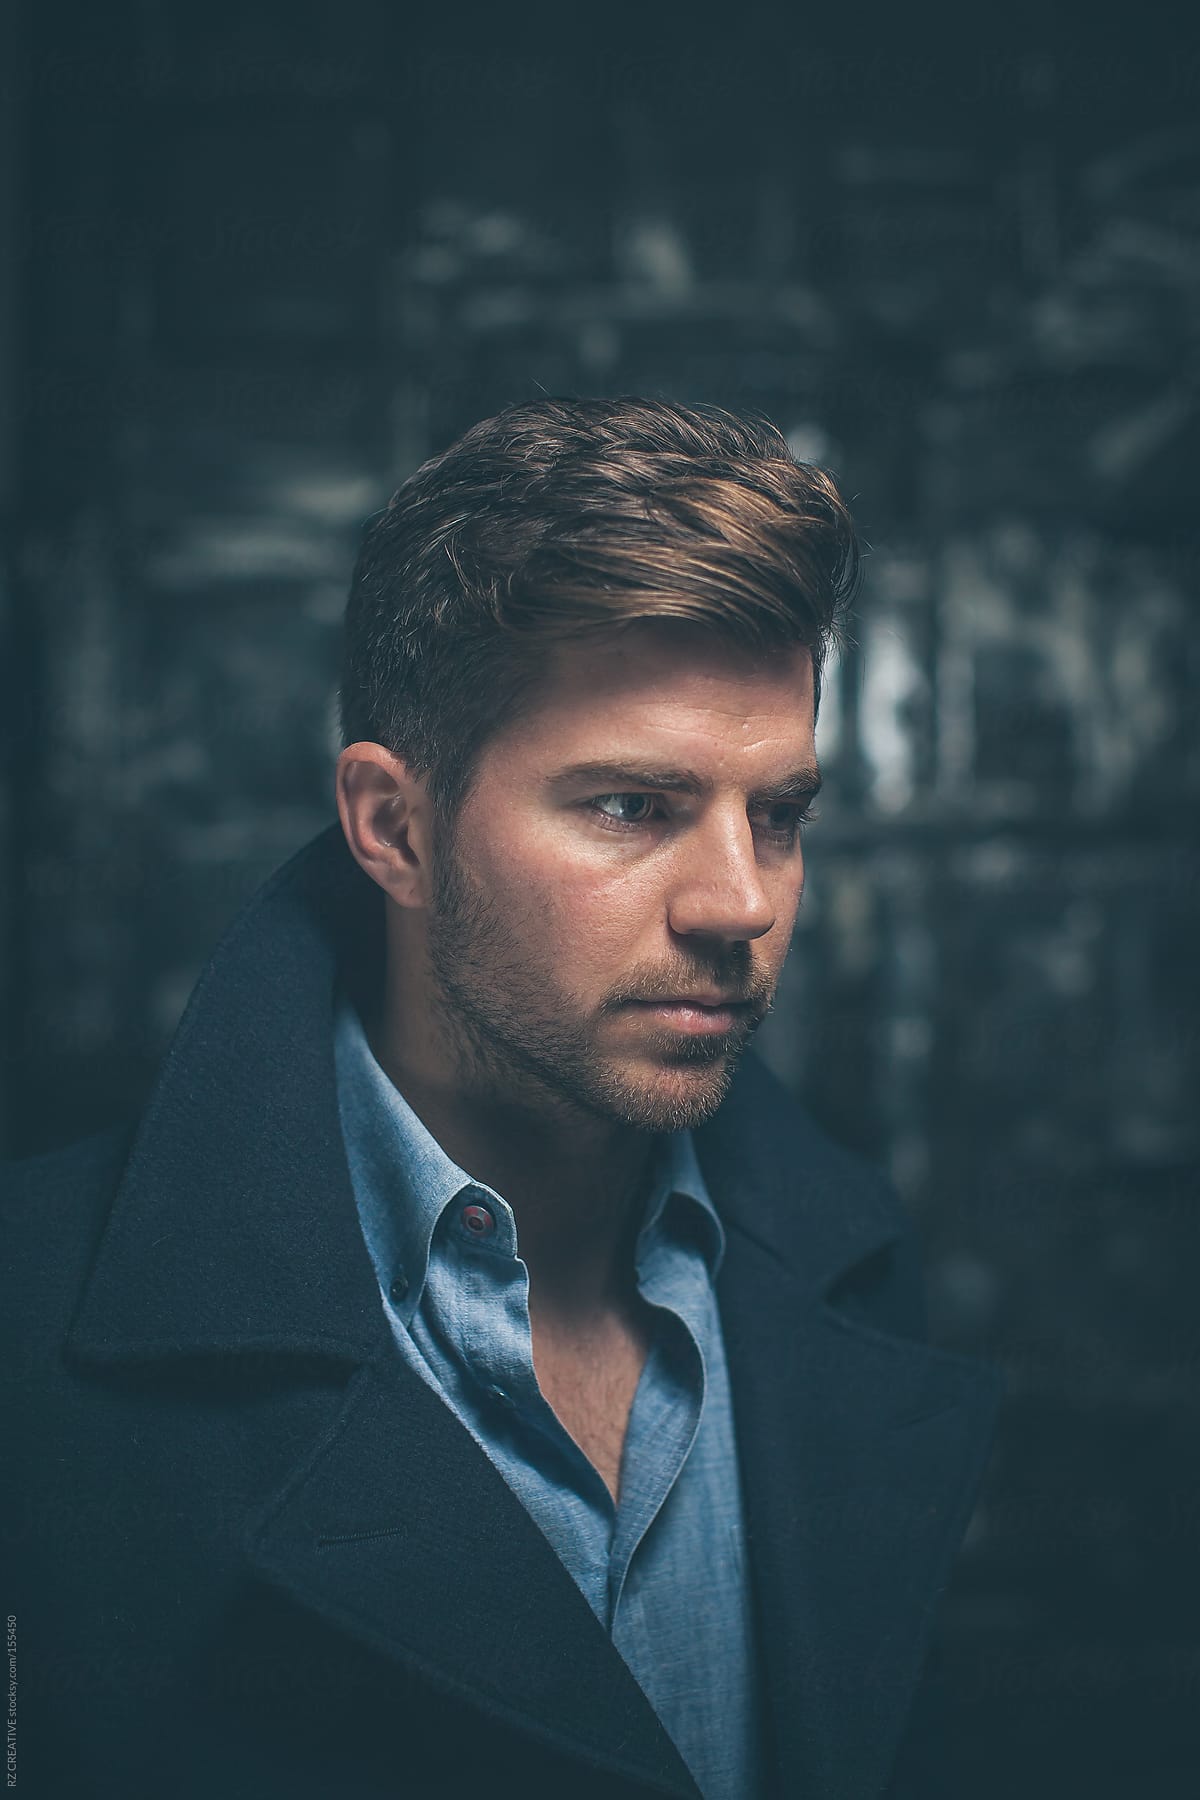 Portrait of a man with great hair wearing a blue dress shirt and peacoat.